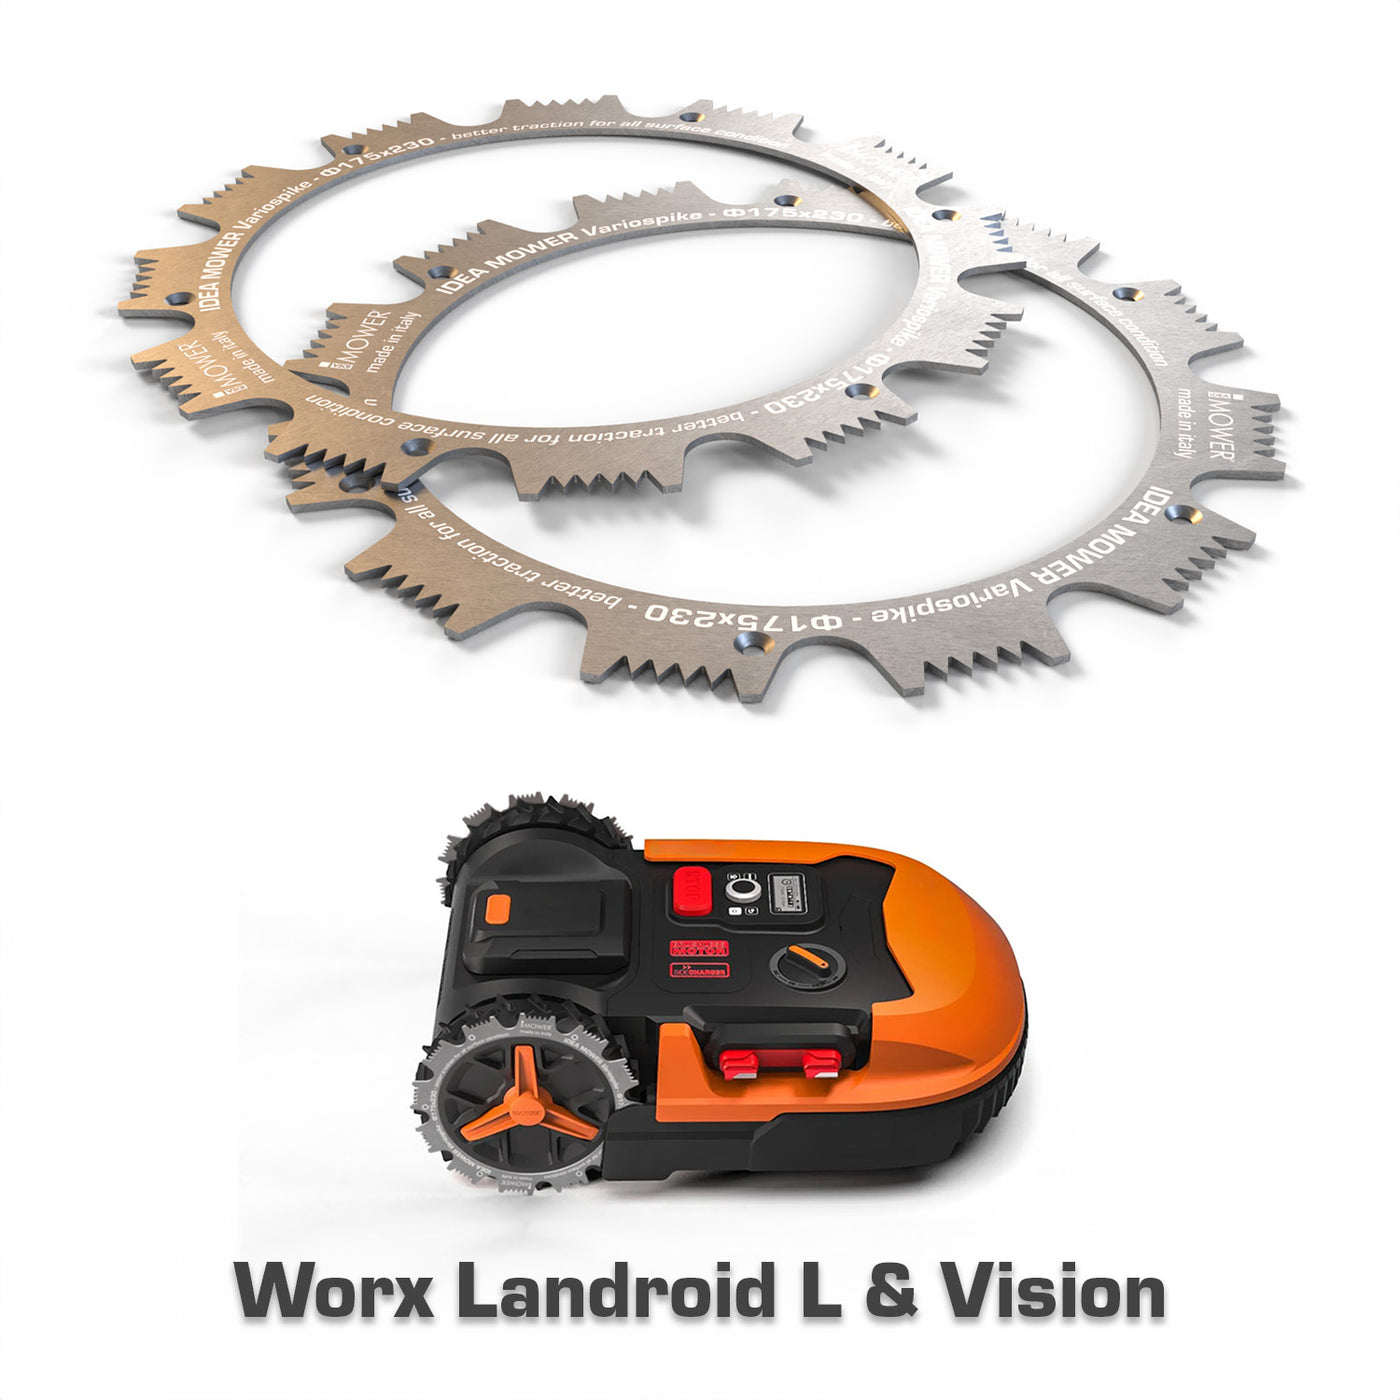 VarioSpike - Gear wheels for Worx Landroid L & Vision